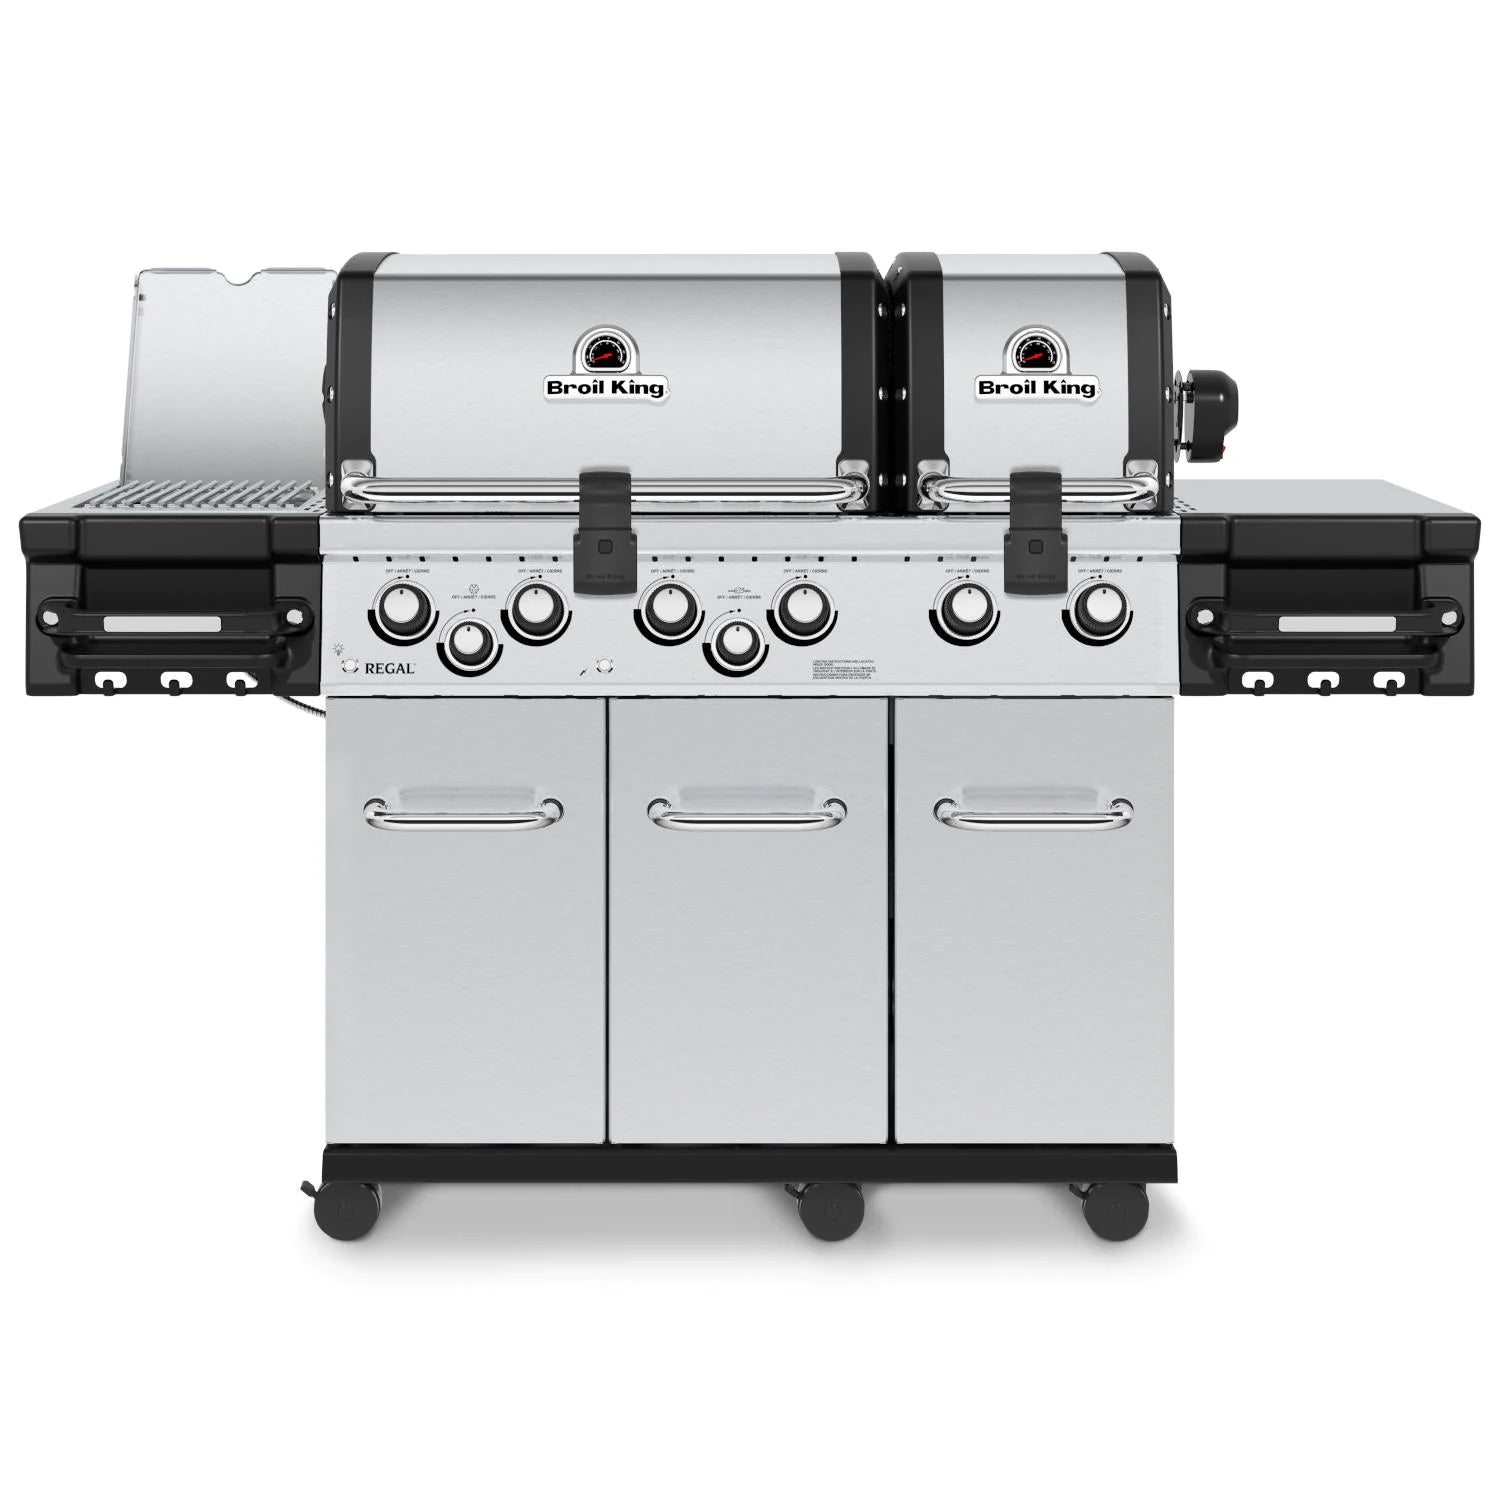 Broil King 957947 Regal S 690 PRO IR 6-Burner Natural Gas Grill With Rotisserie & Infrared Side Burner - Stainless Steel